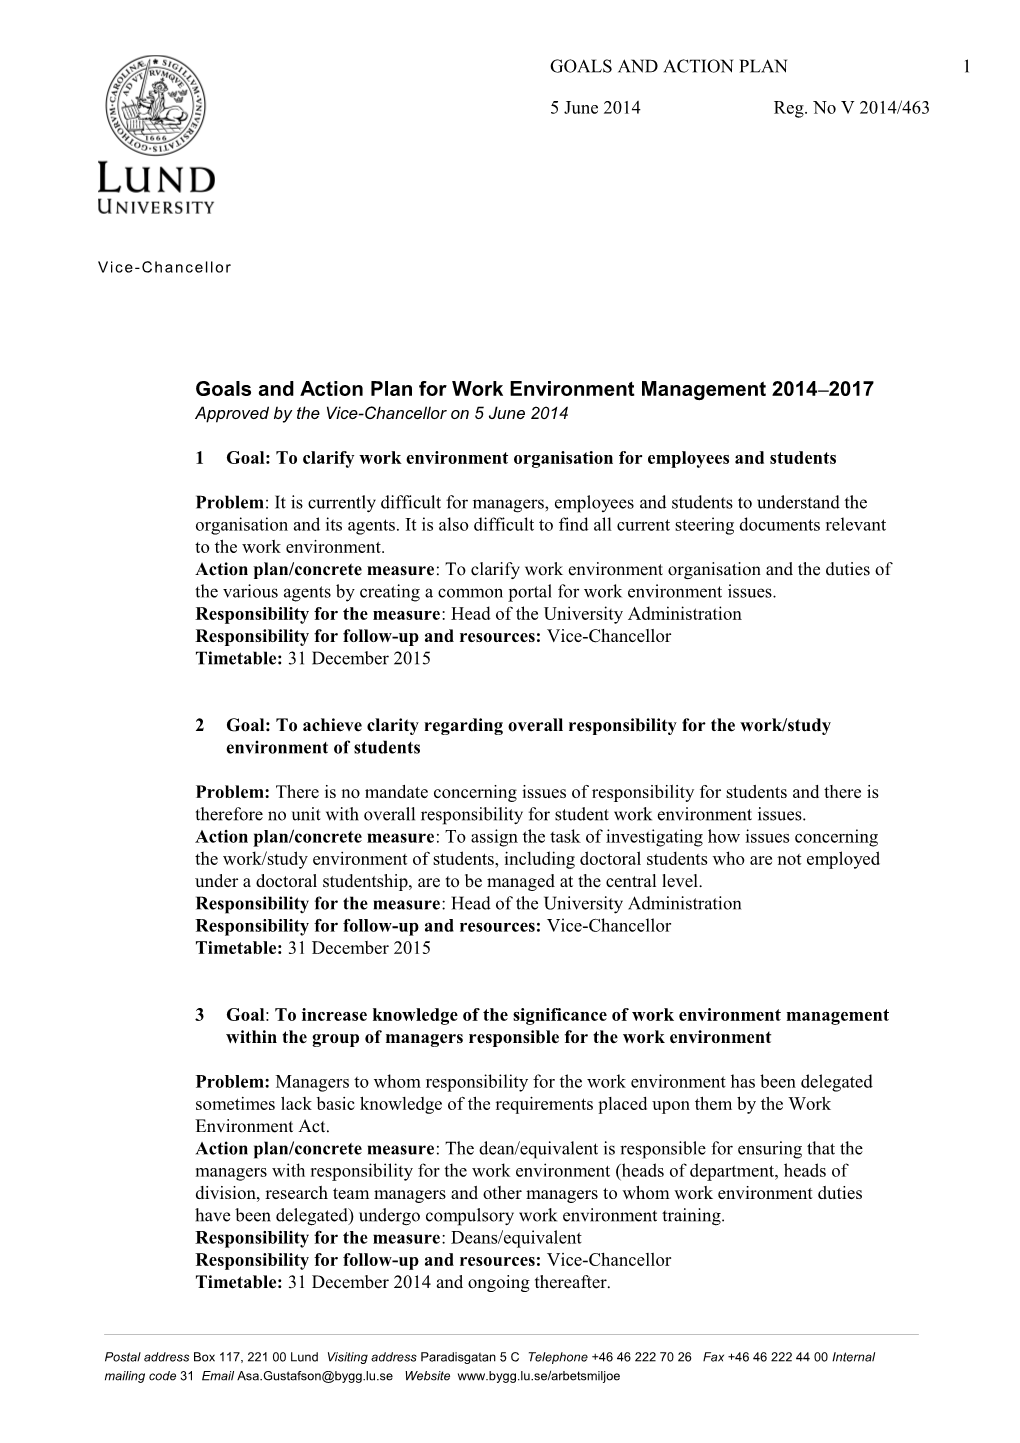 Goals and Action Plan for Work Environment Management 2014 2017